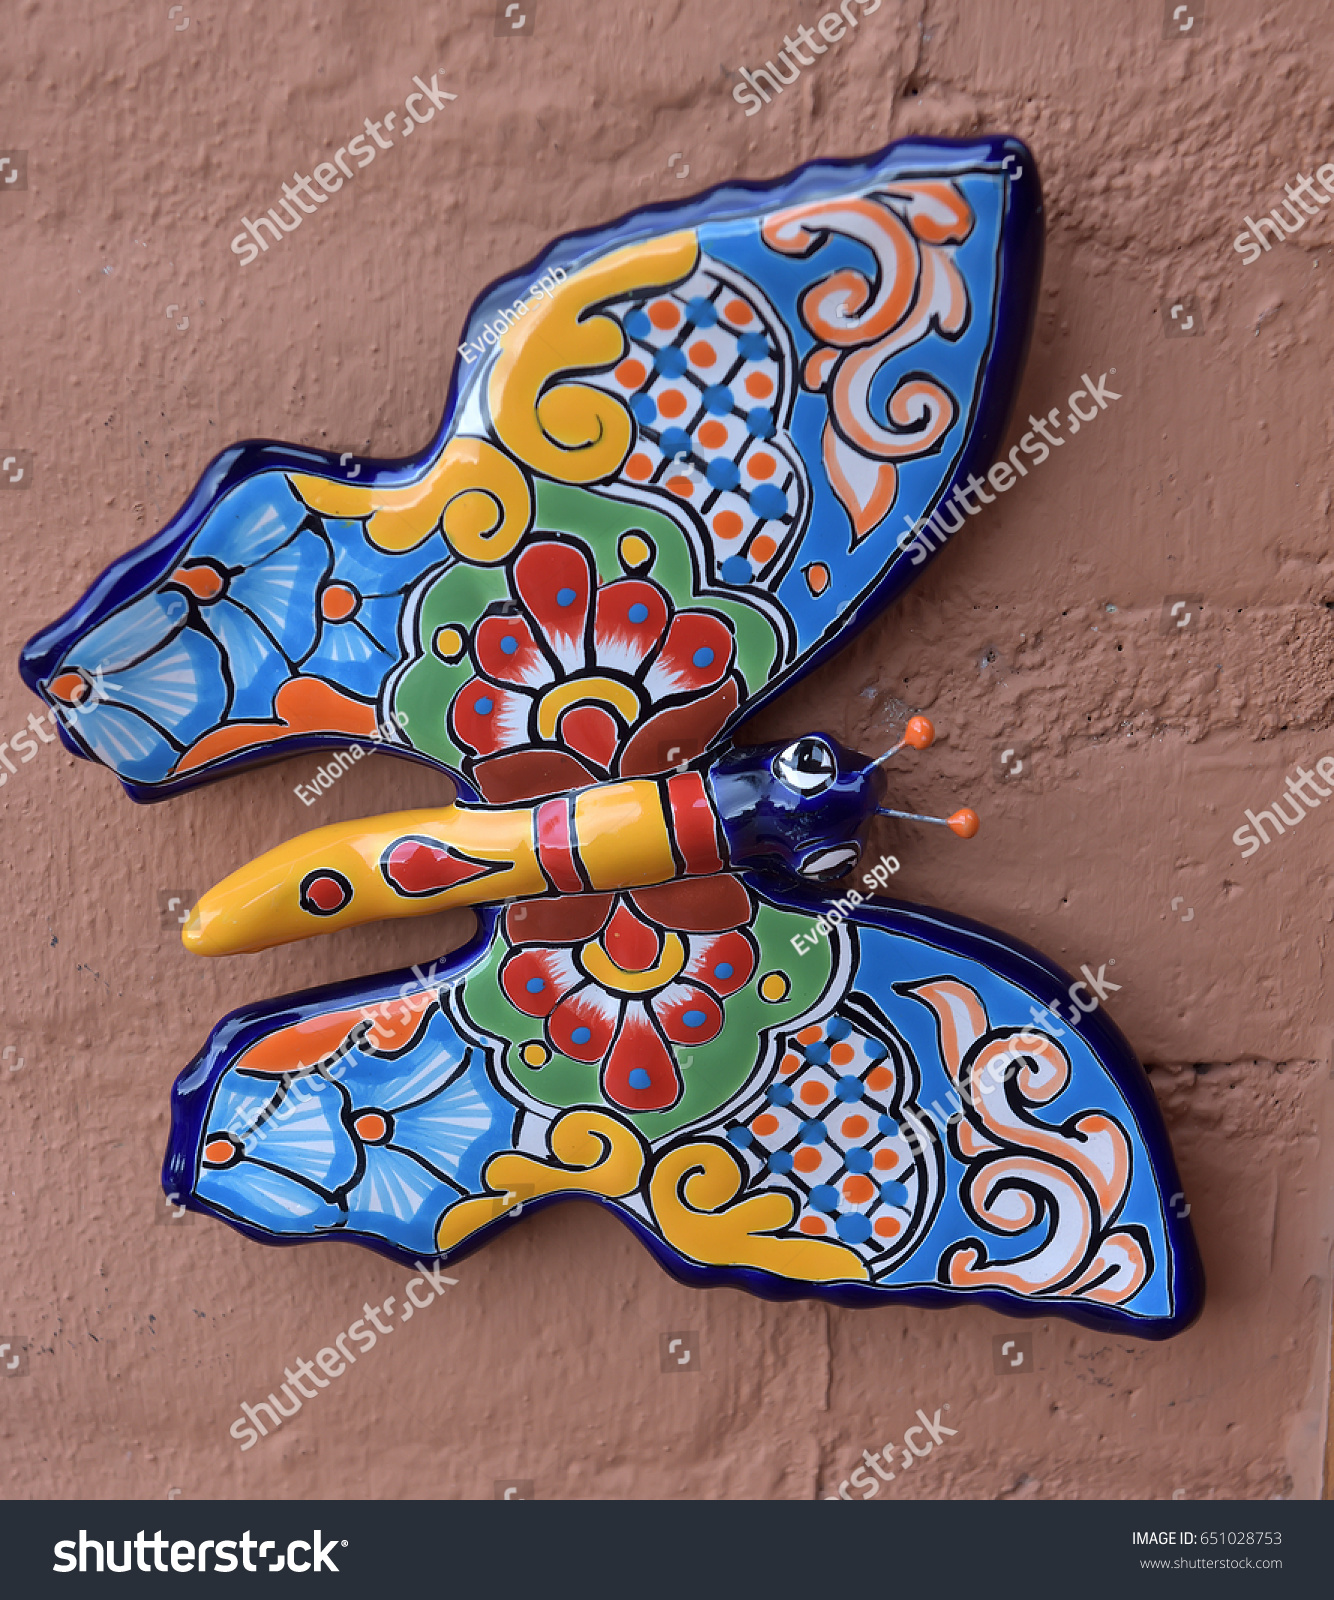 Decorative Mini Talavera Hand Painted Butterfly Stock Photo Edit Now 651028753